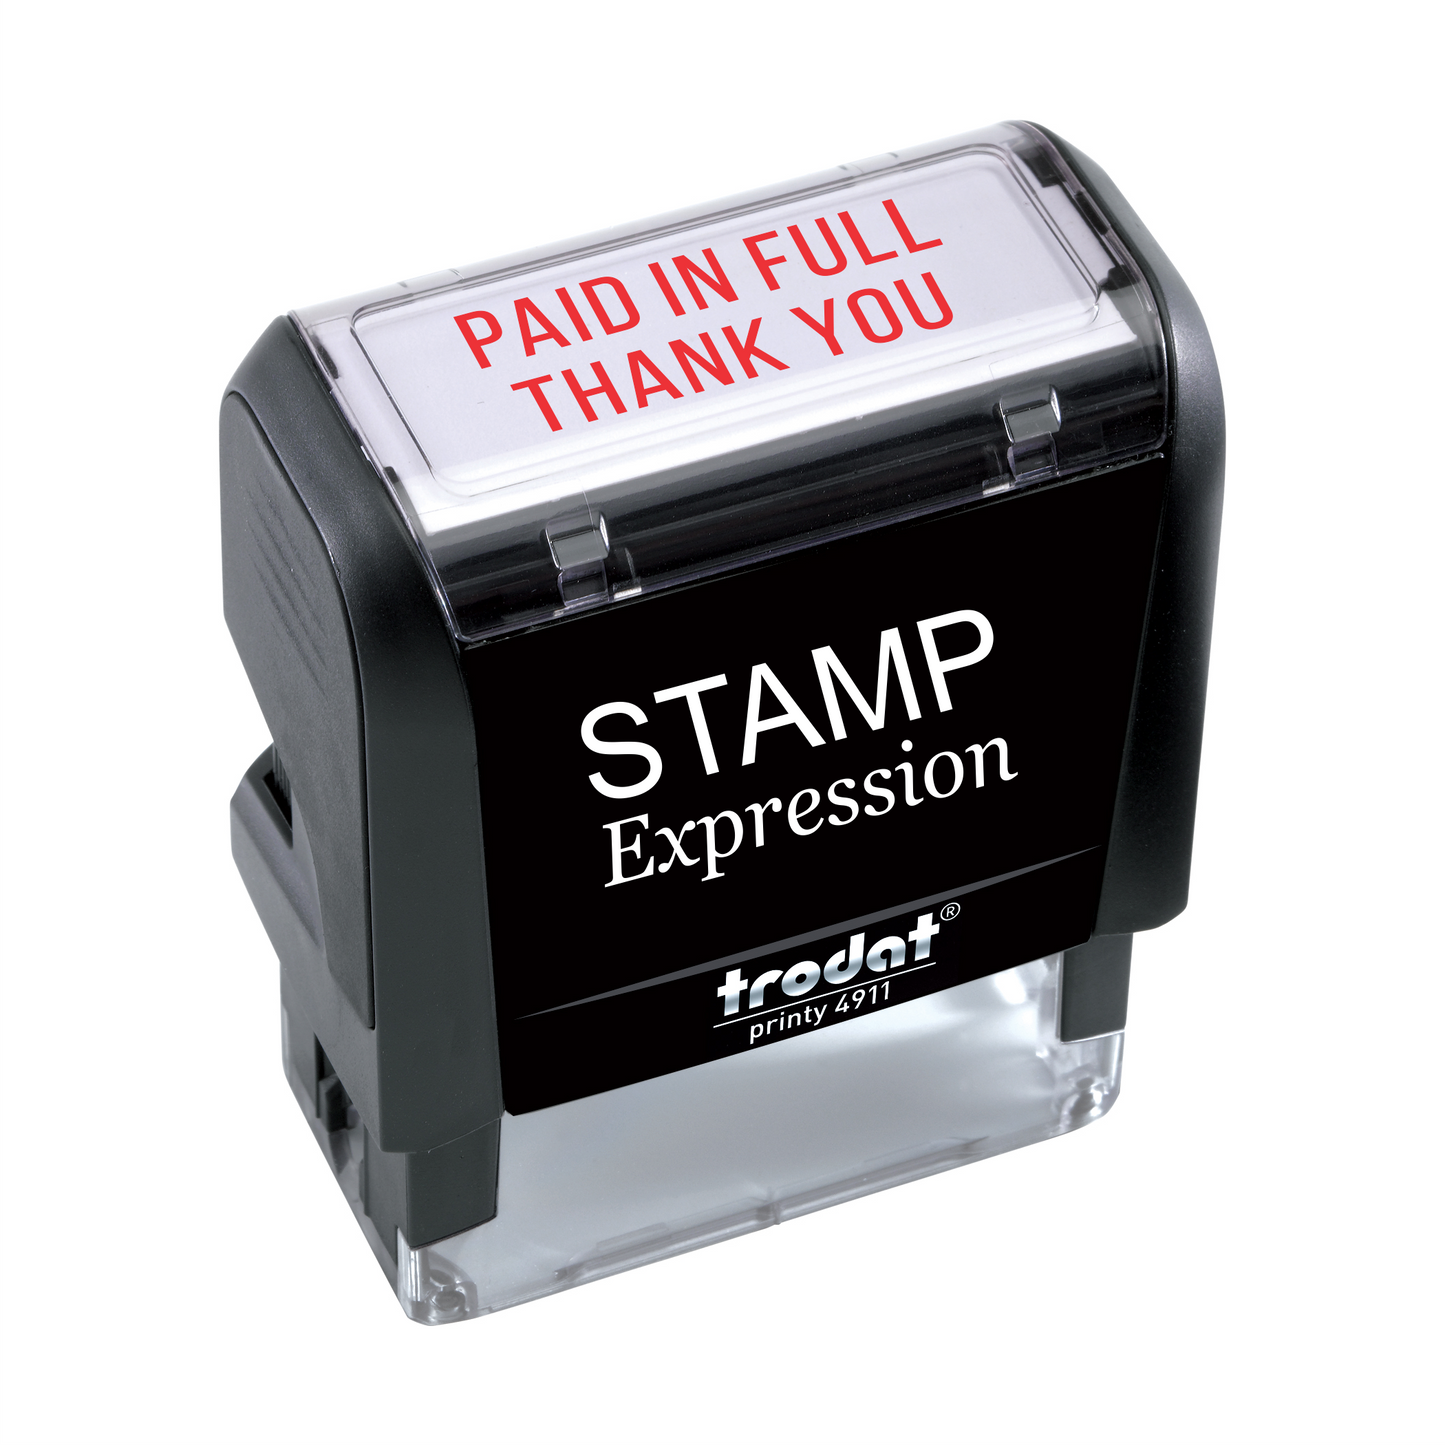 Paid in Full Thank You Office Self Inking Rubber Stamp (SH-5344)